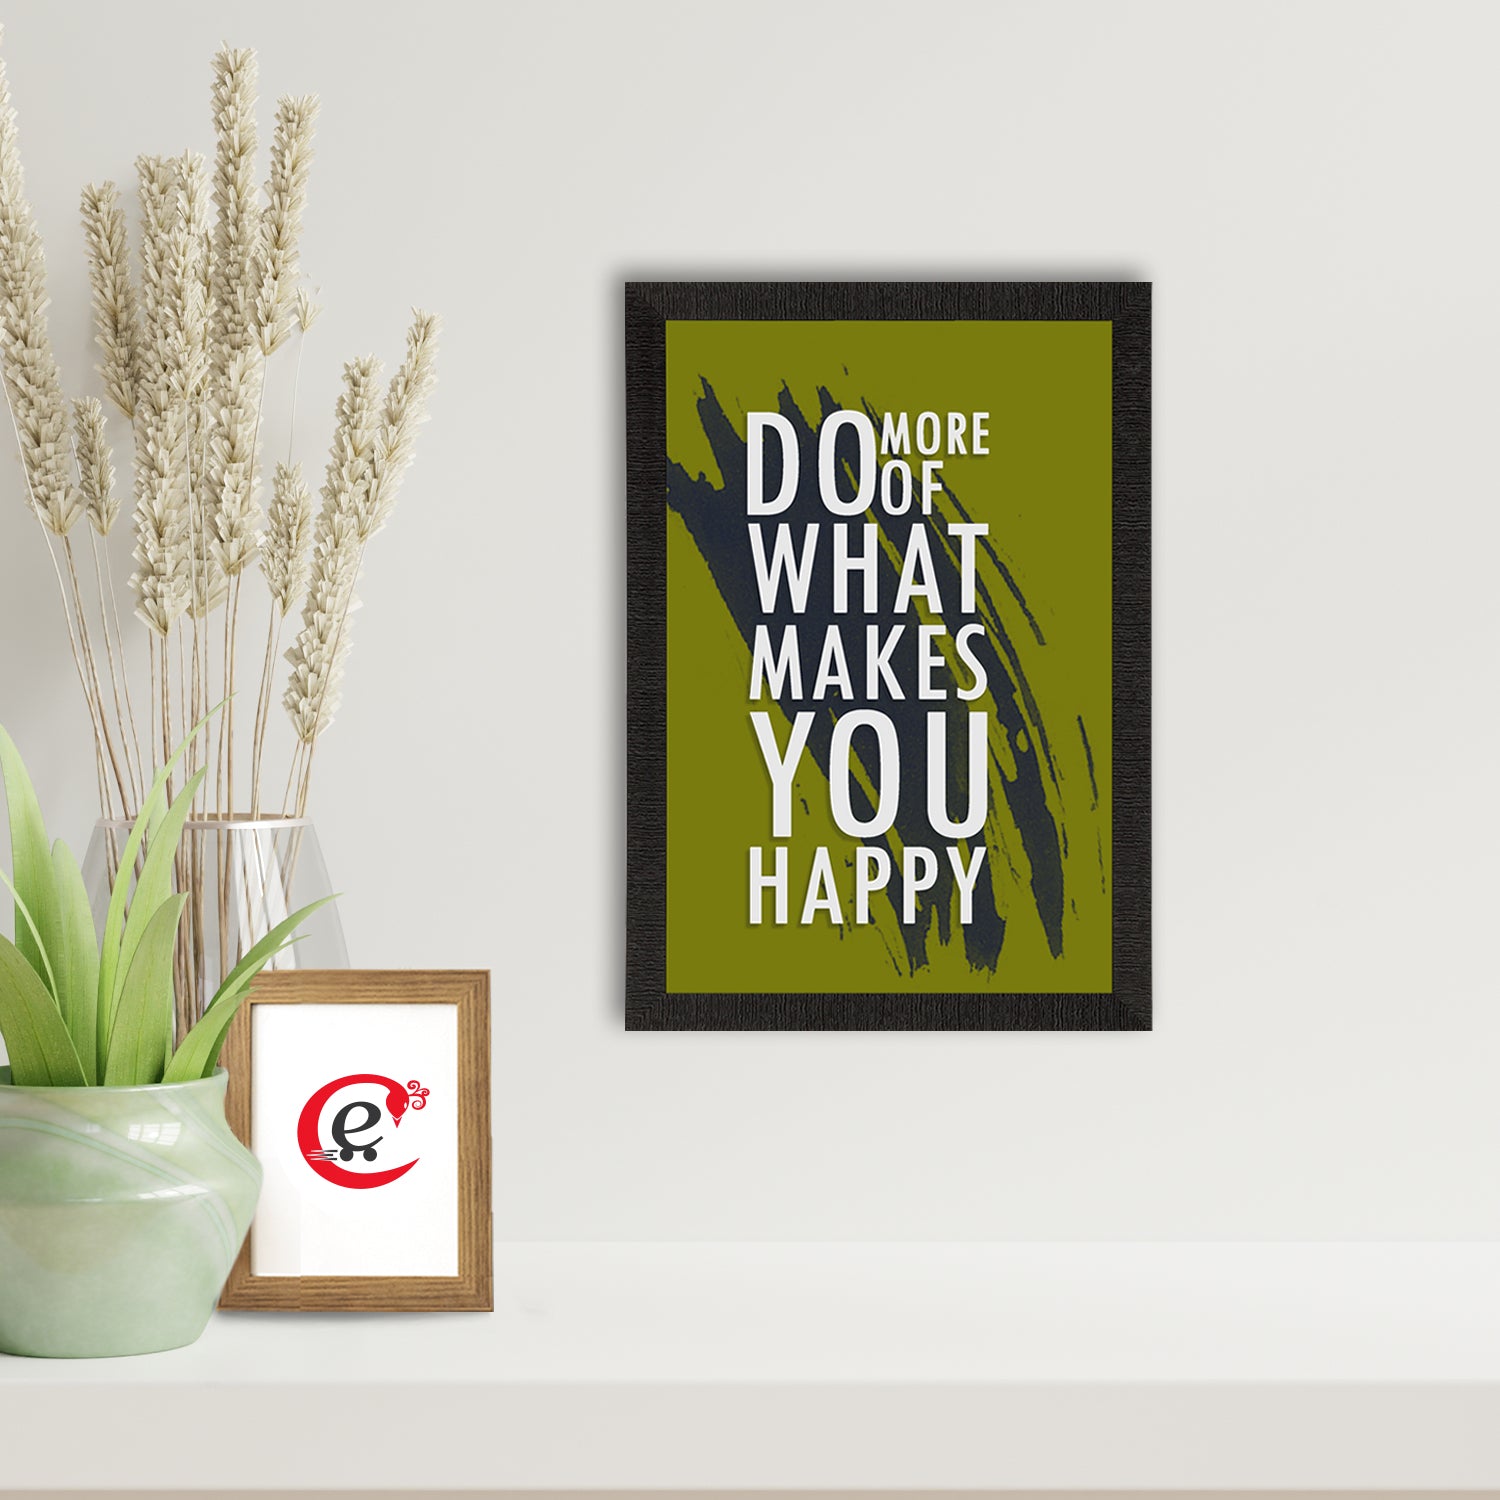 "Do more of what makes you Happy" Motivational Quote Satin Matt Texture UV Art Painting 1